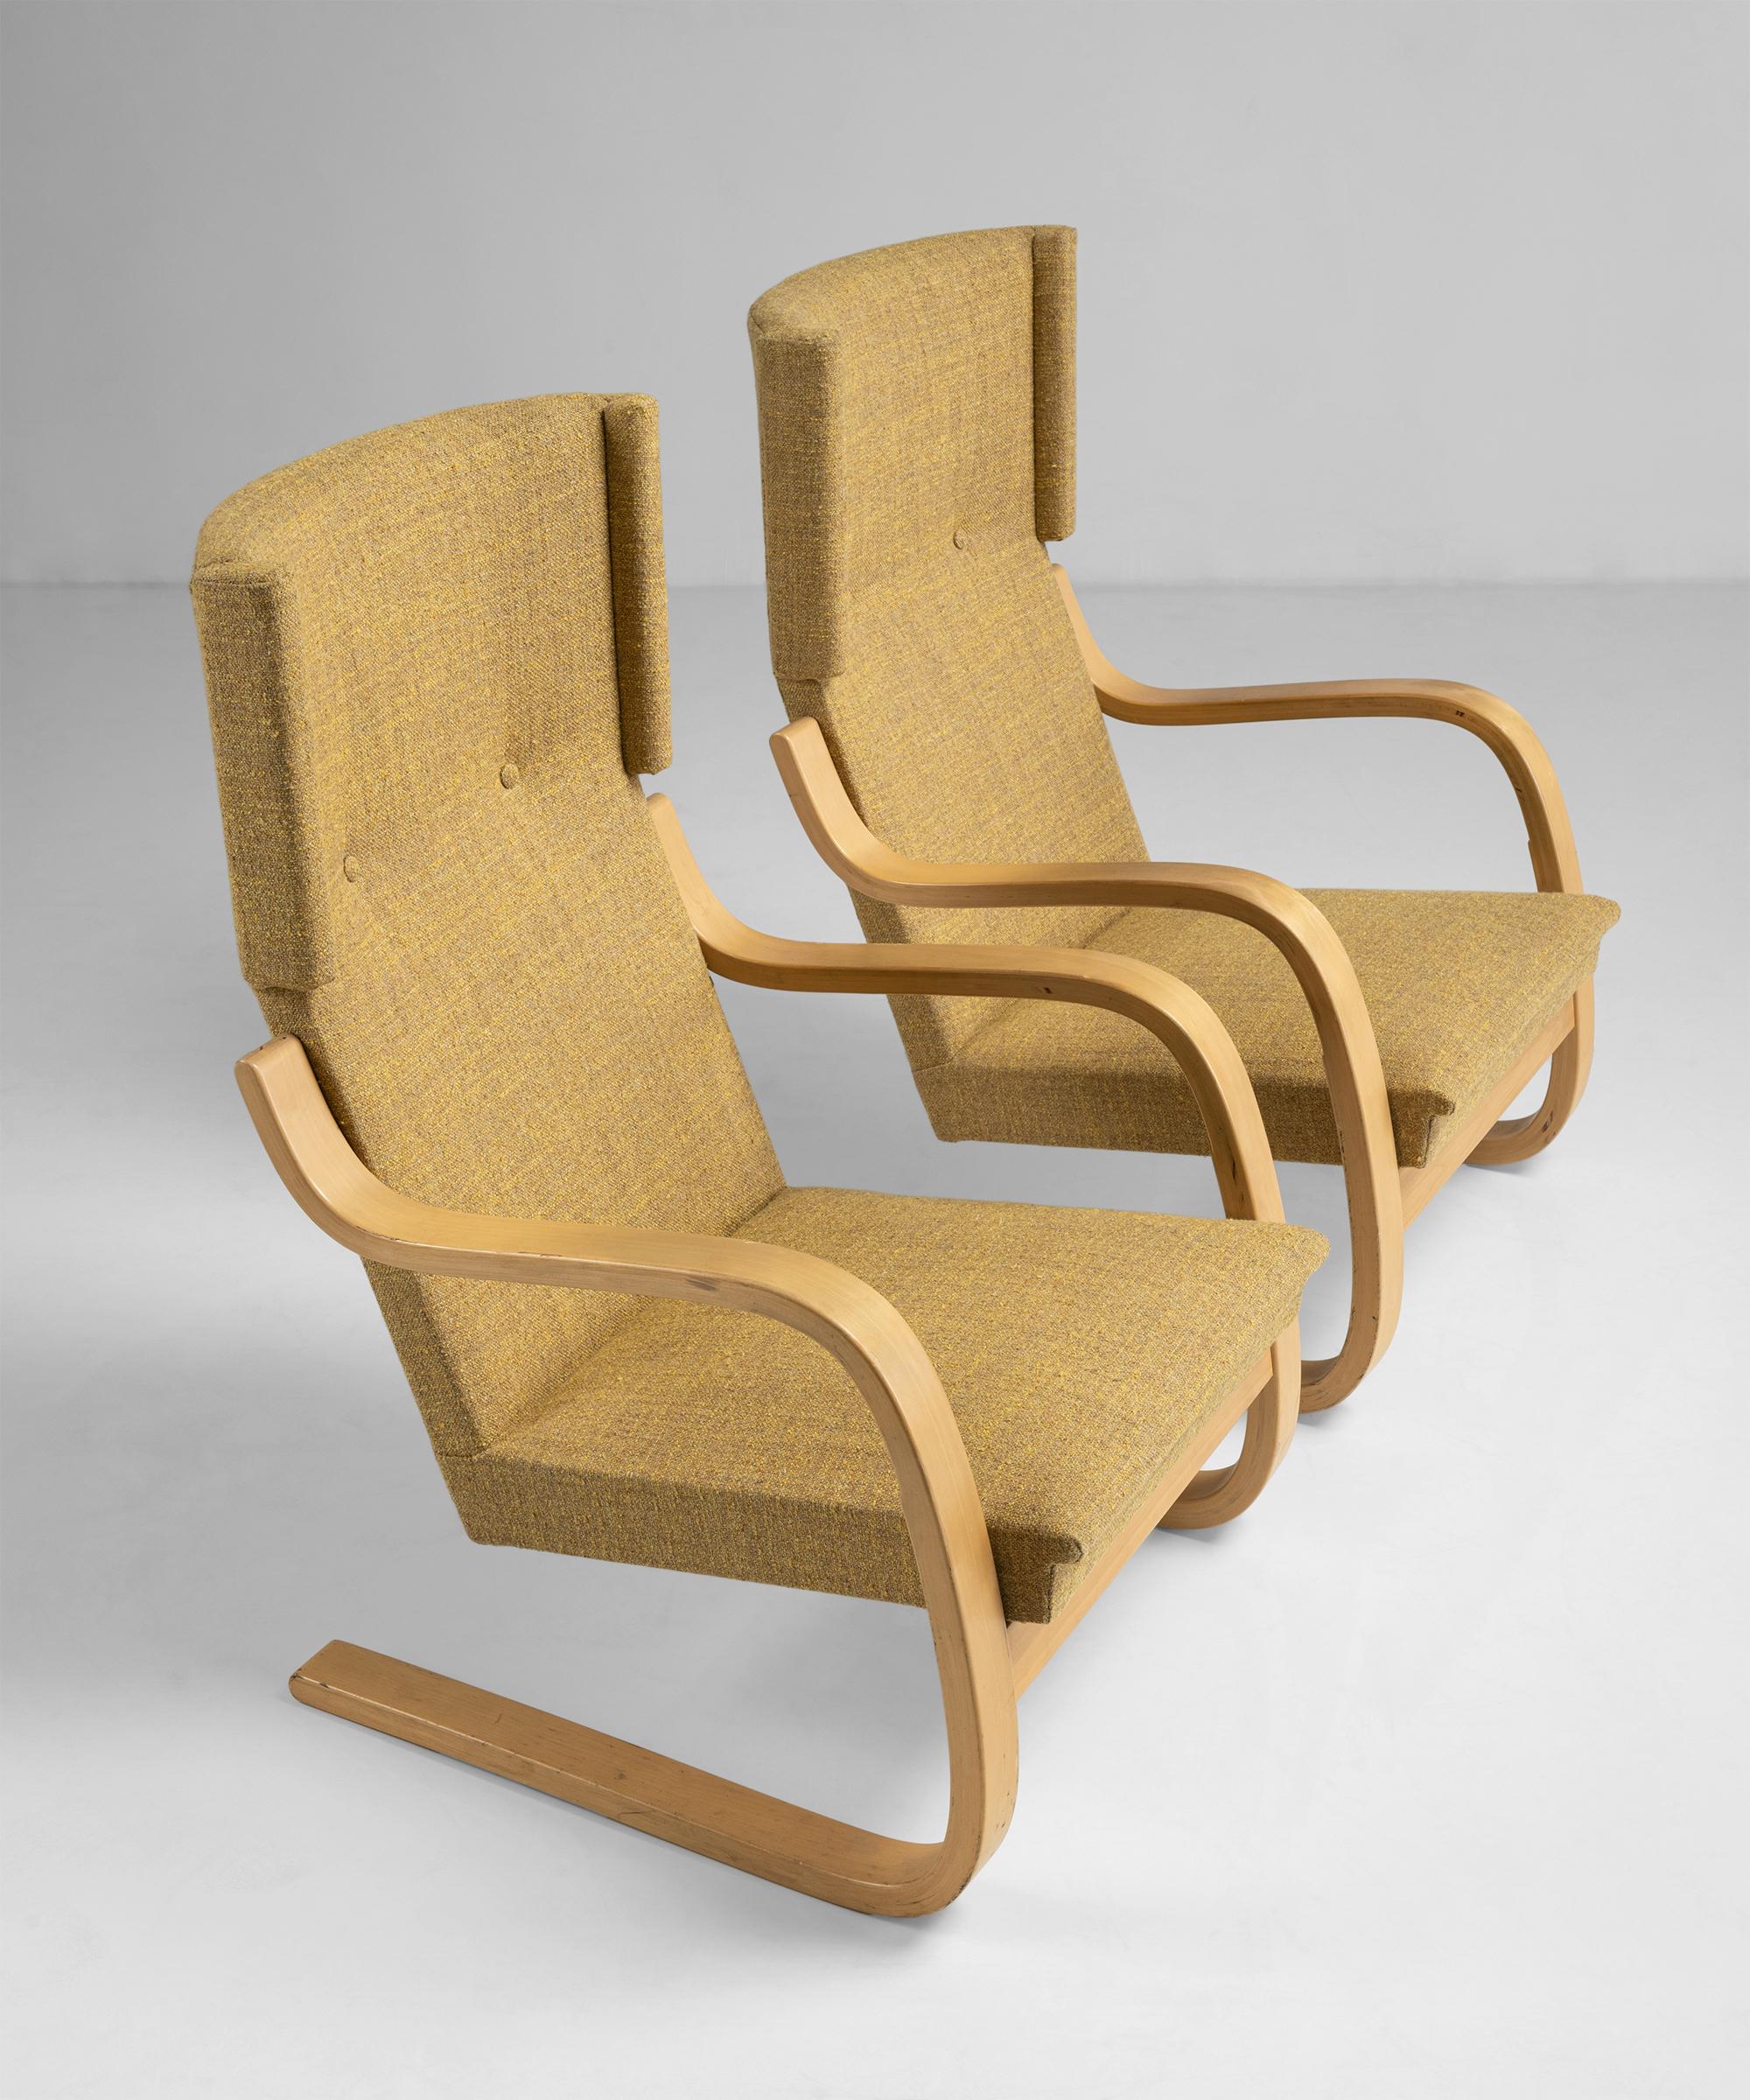 Alvar Aalto Cantilevered armchairs 

Finland Circa 1930

A pre-Artek 401 padded armchair, designed by Alvar Aalto for the Paimio Sanatorium. Newly upholstered in Textured Nub Golden Honey Tweed.

Measures: 25”W x 28”D x 38.5”H x 14” seat.